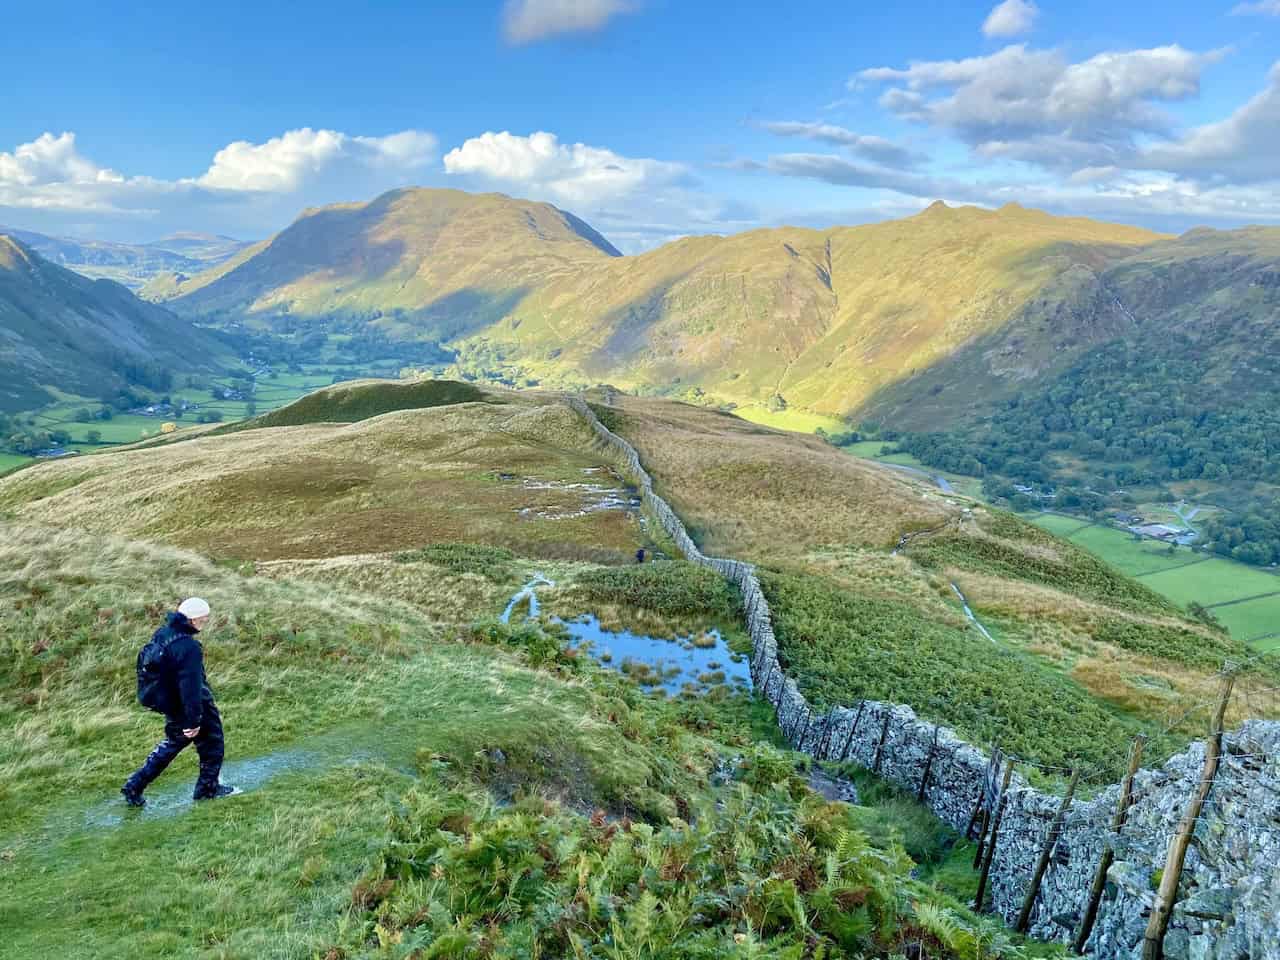 The route from Hartsop above How to Deepdale Bridge generally follows the dry stone wall and affords amazing views of the Place Fell / Angletarn Pikes / Brock Crags range of hills.